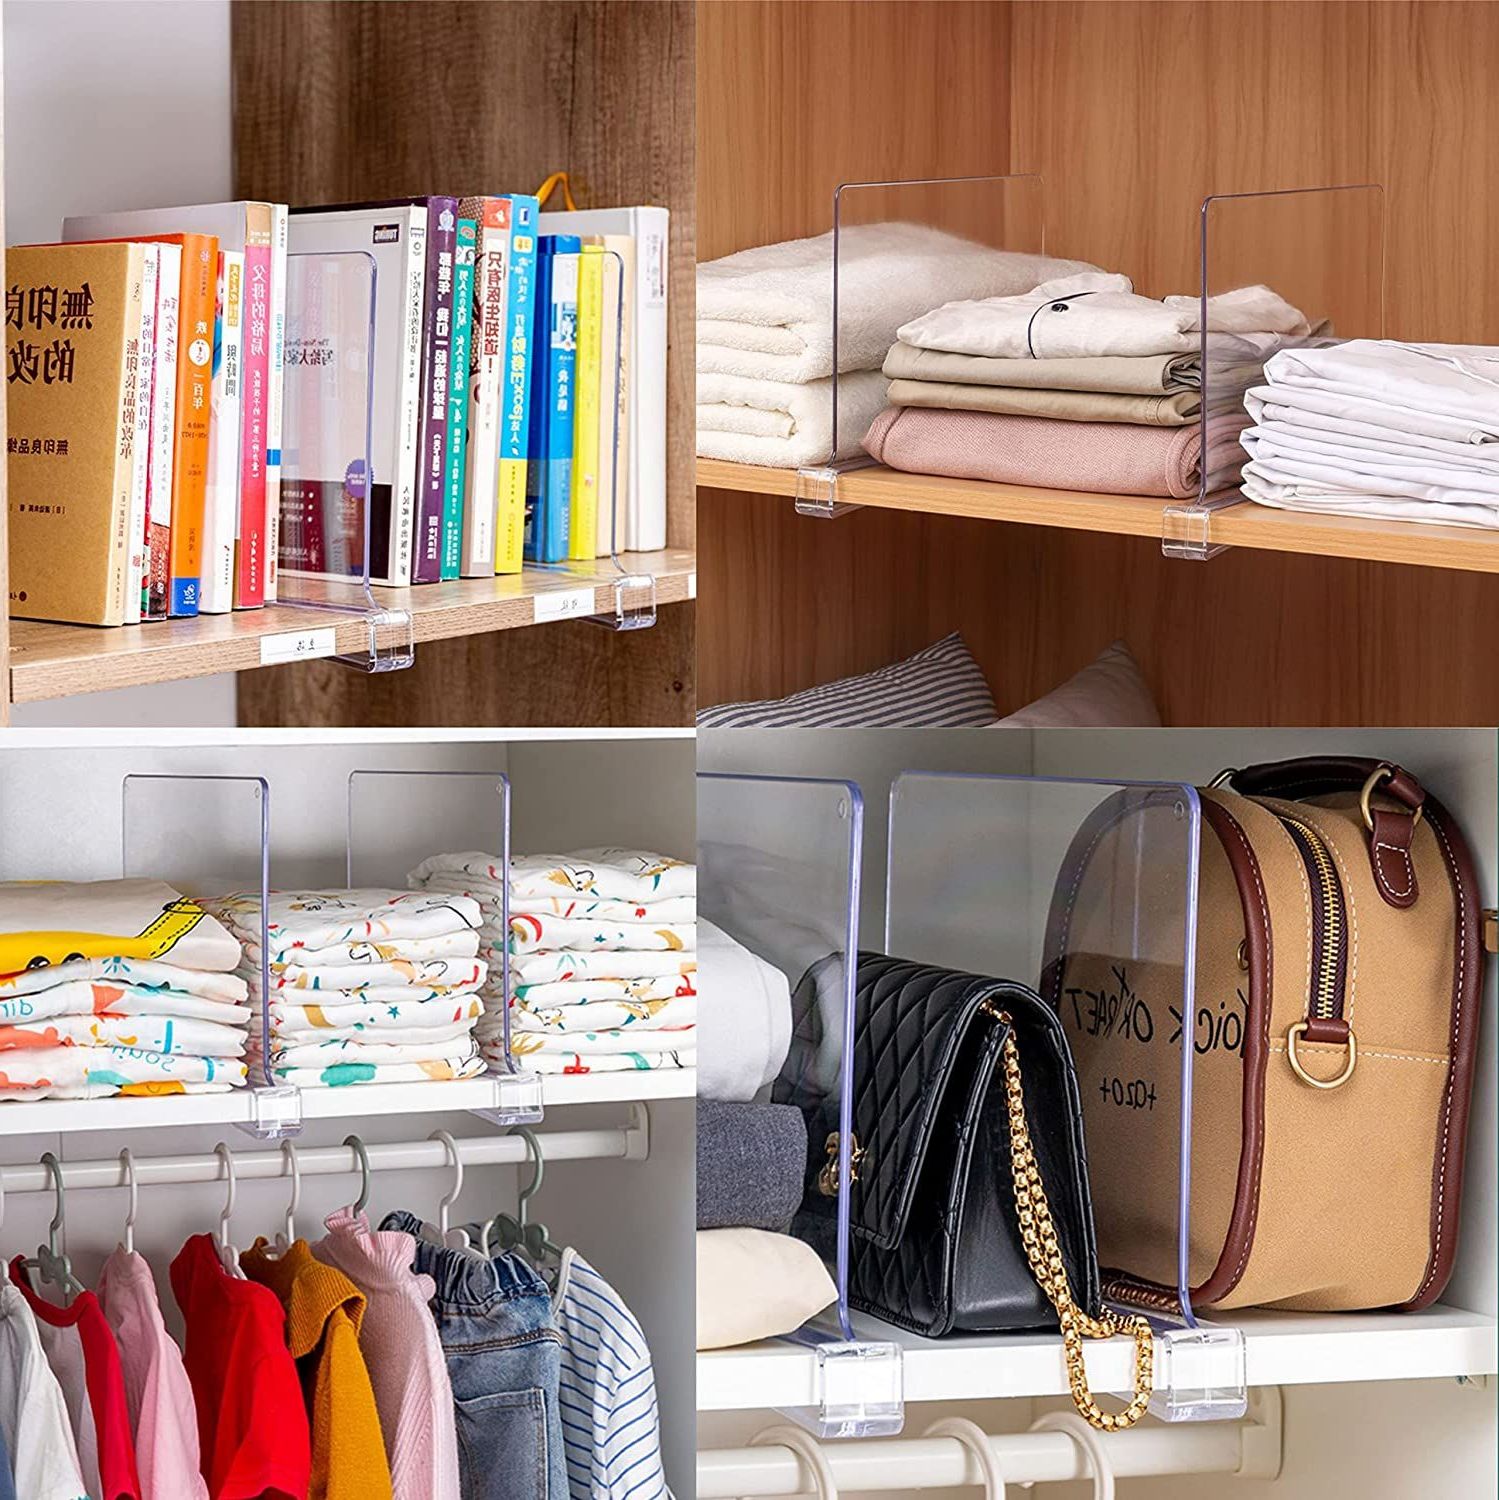 35 Best Closet Organization Ideas To Maximize Space Pertaining To Current Closet Organizer Wardrobes (View 8 of 10)